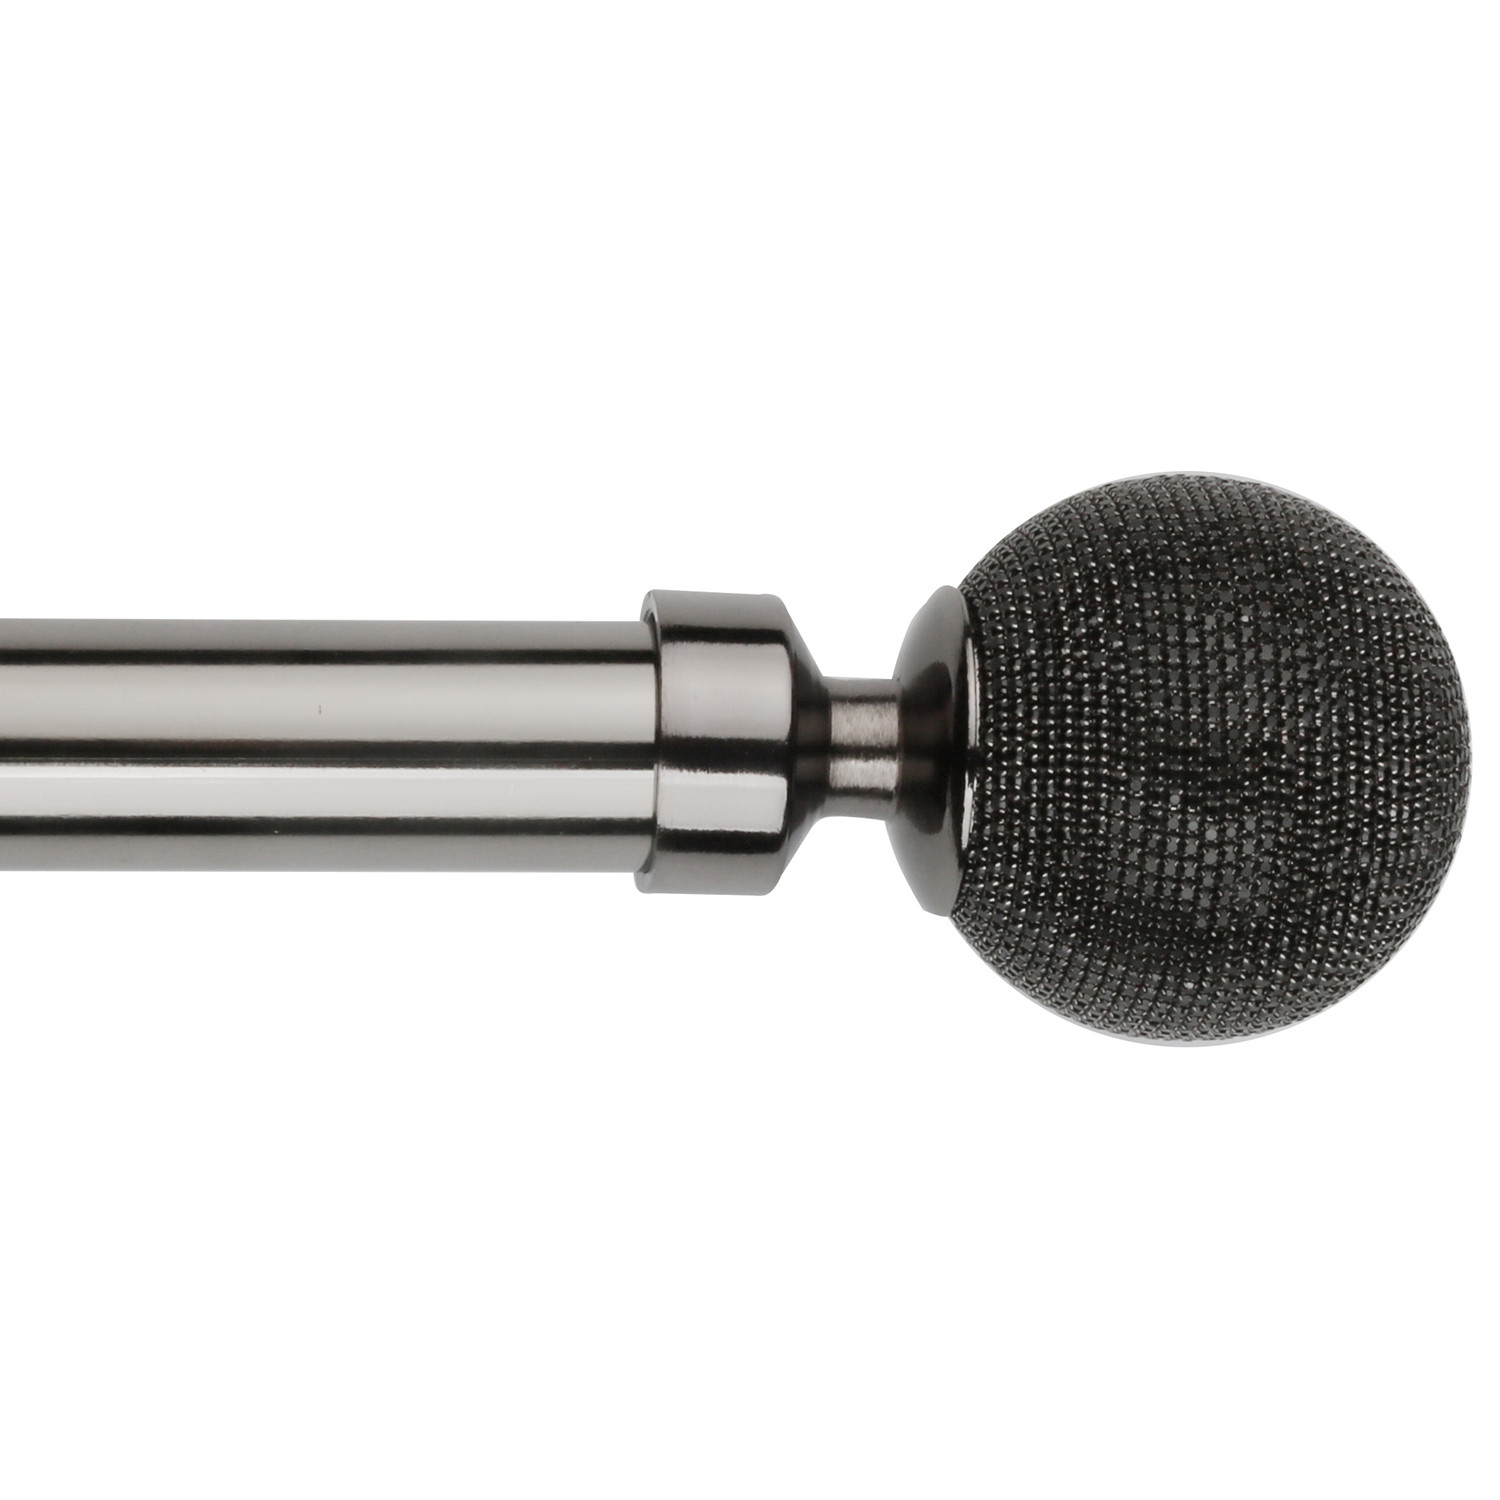 Vogue Pewter Extendable Curtain Pole 170 to 300cm Image